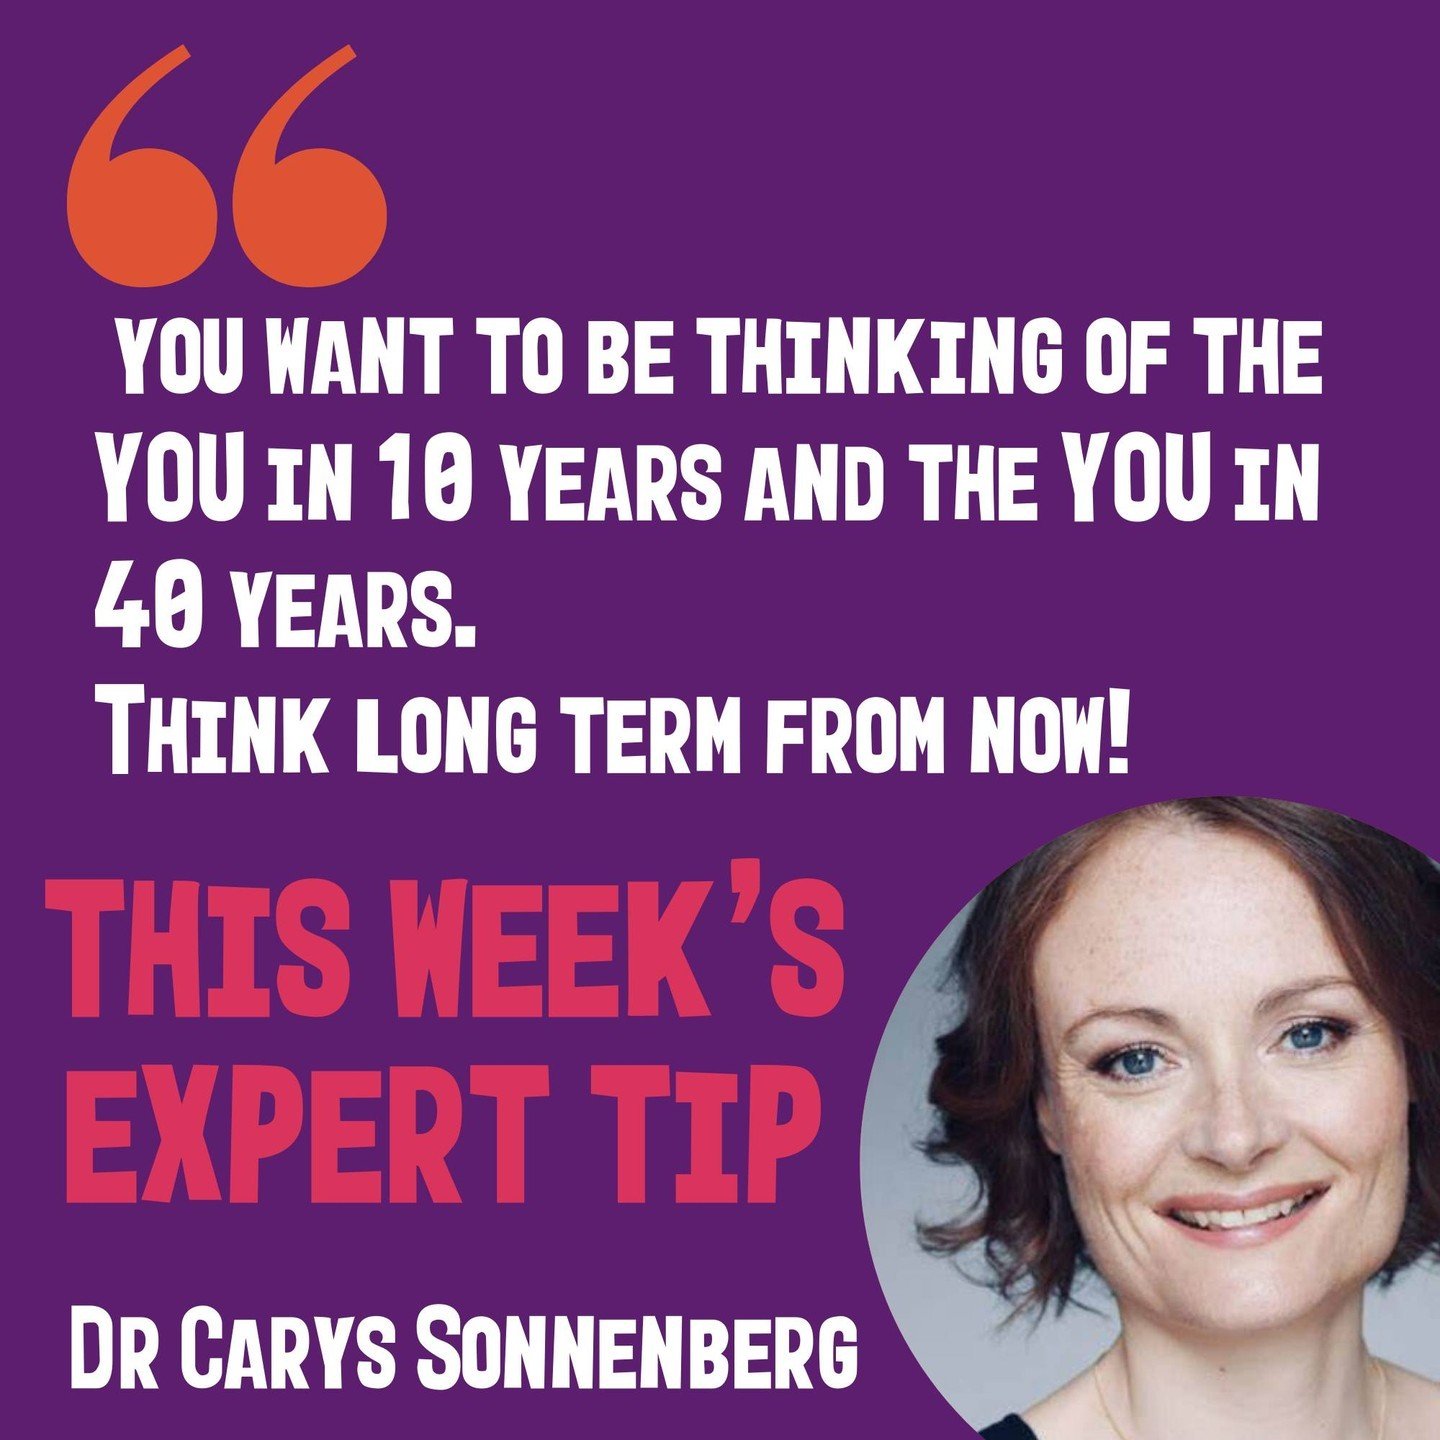 Dr Carys Sonnenberg is a GP with a special interest in women's health and menopause and she's also a member of the British Menopause Society.

Thank you Dr Sonnenberg @rowenahealth for sharing your expert tip with us.

&ldquo;Think long term from NOW